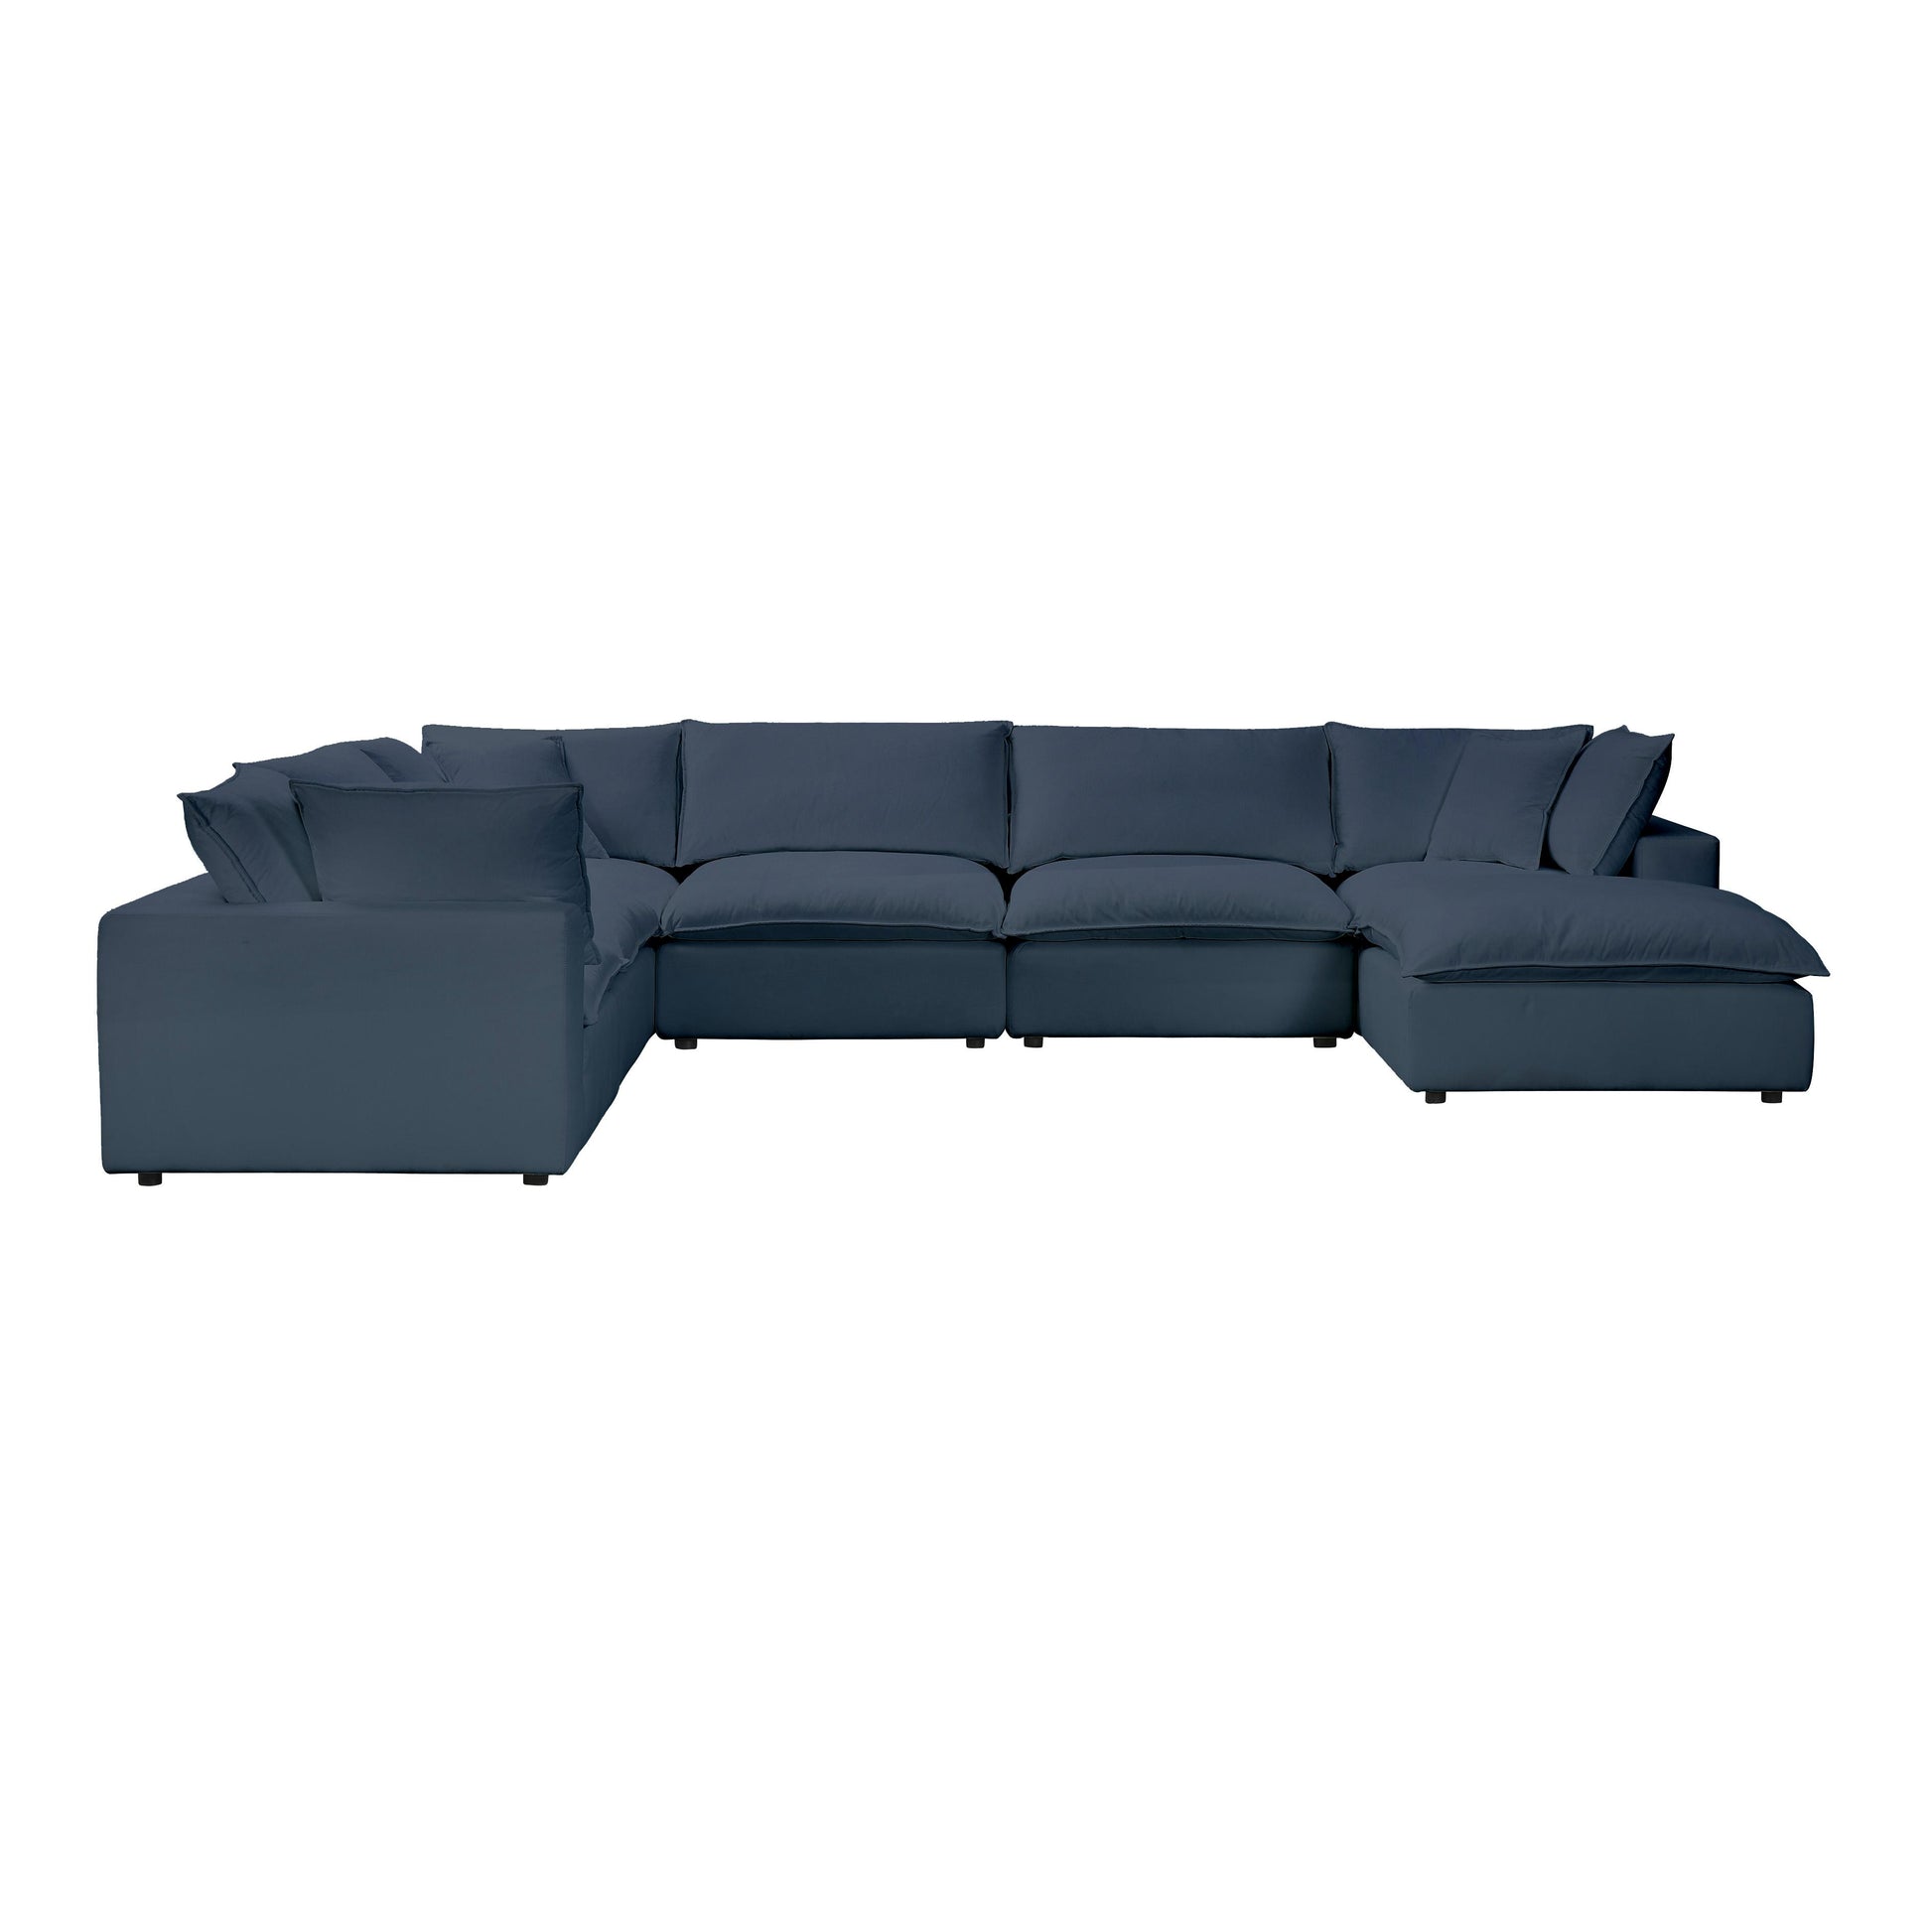 Tov Furniture Cali Navy Modular Large Chaise Sectional